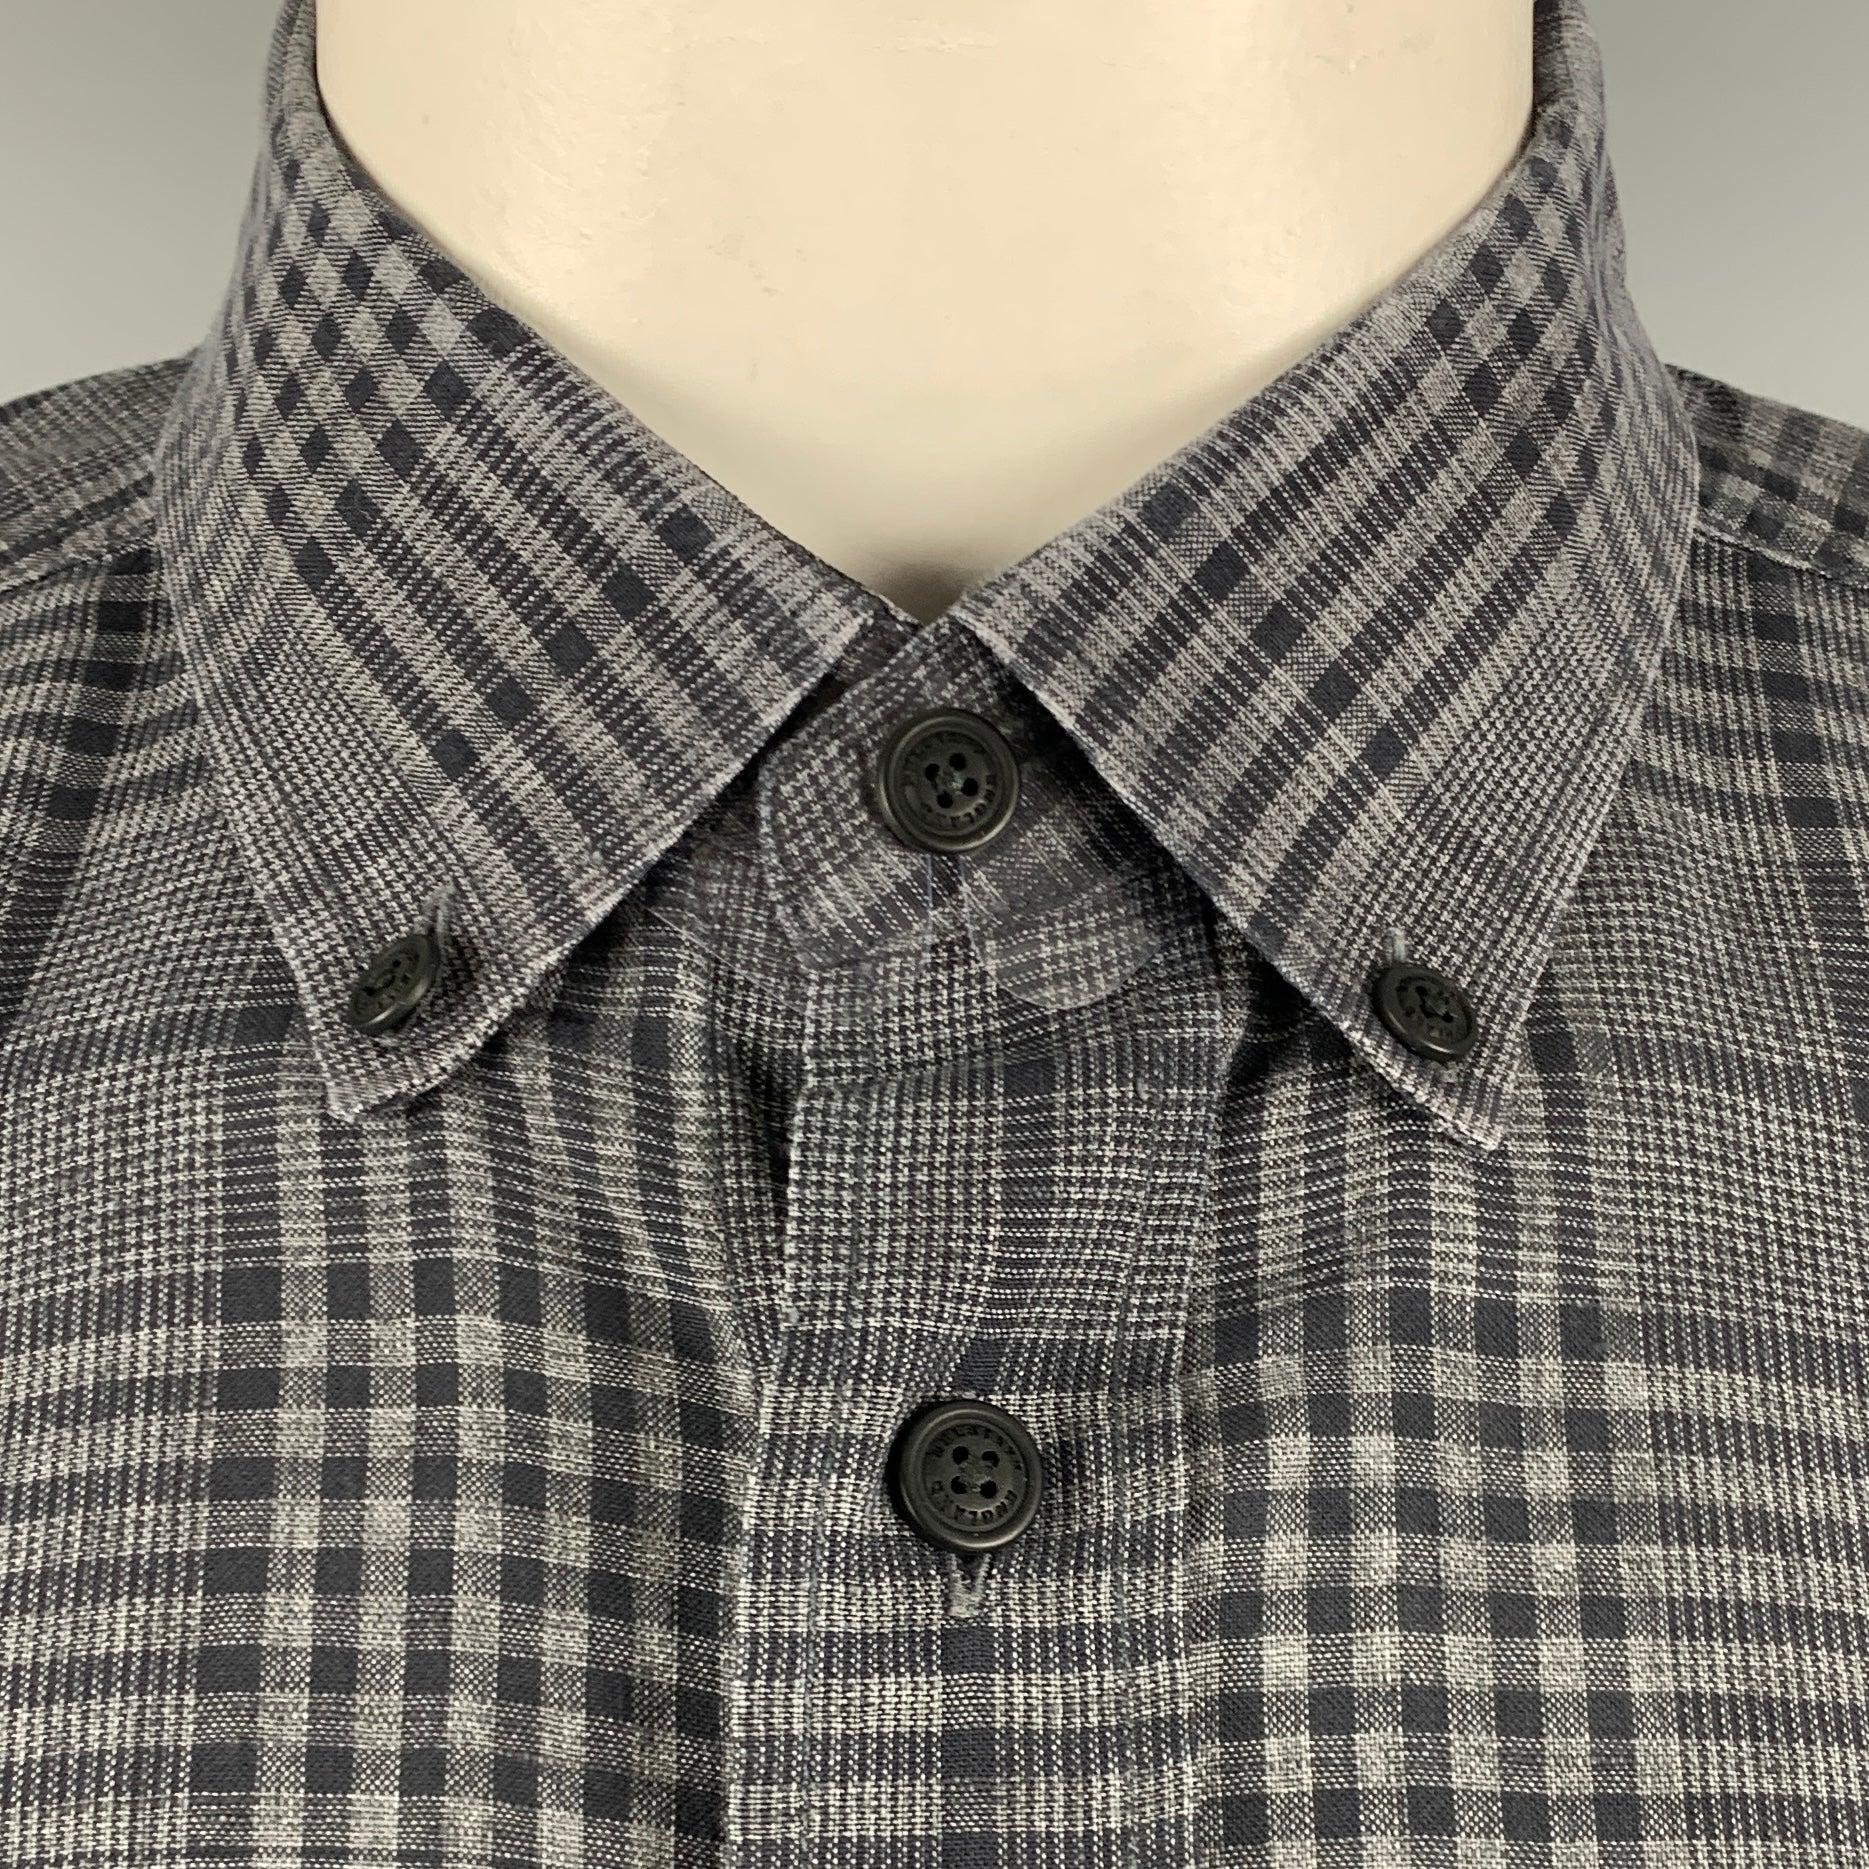 BELSTAFF long sleeve shirt
in a grey and black linen cotton blend woven fabric featuring a plaid pattern, one buttoned pocket, button down collar, and button closure.Very Good Pre-Owned Condition. Minor signs of wear. 

Marked:   L 

Measurements: 
